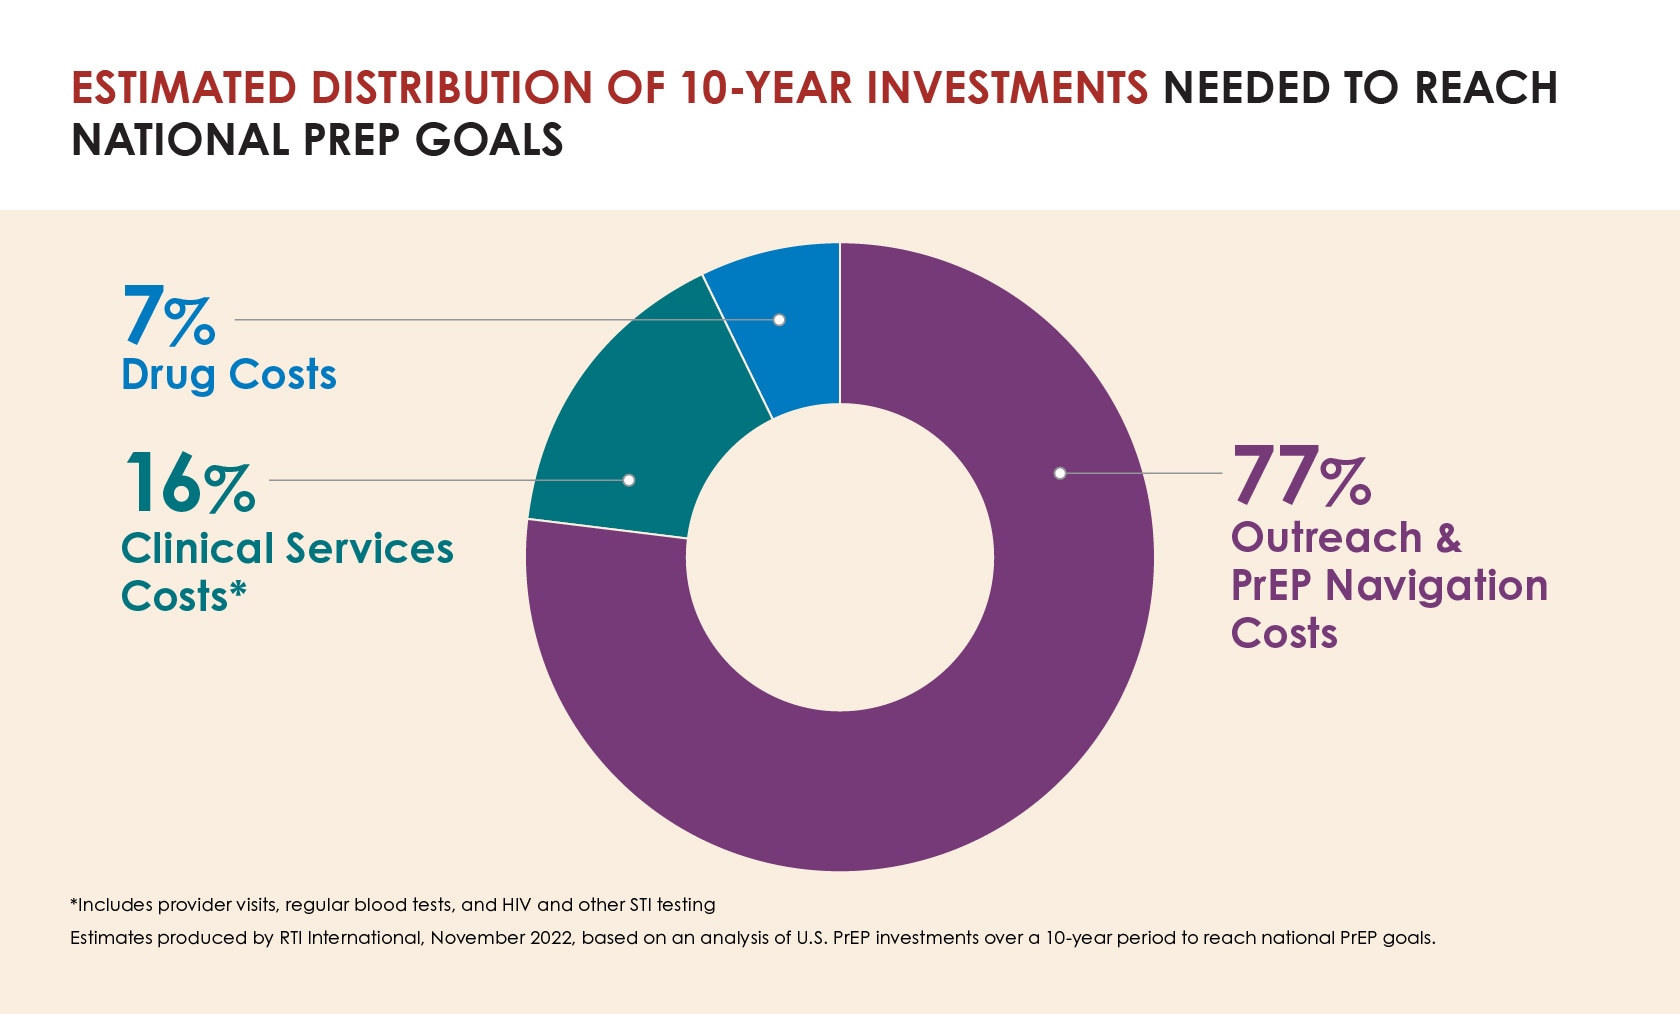 Graphic showing the estimated distribution of 10-year investments needed to reach national PrEP goals